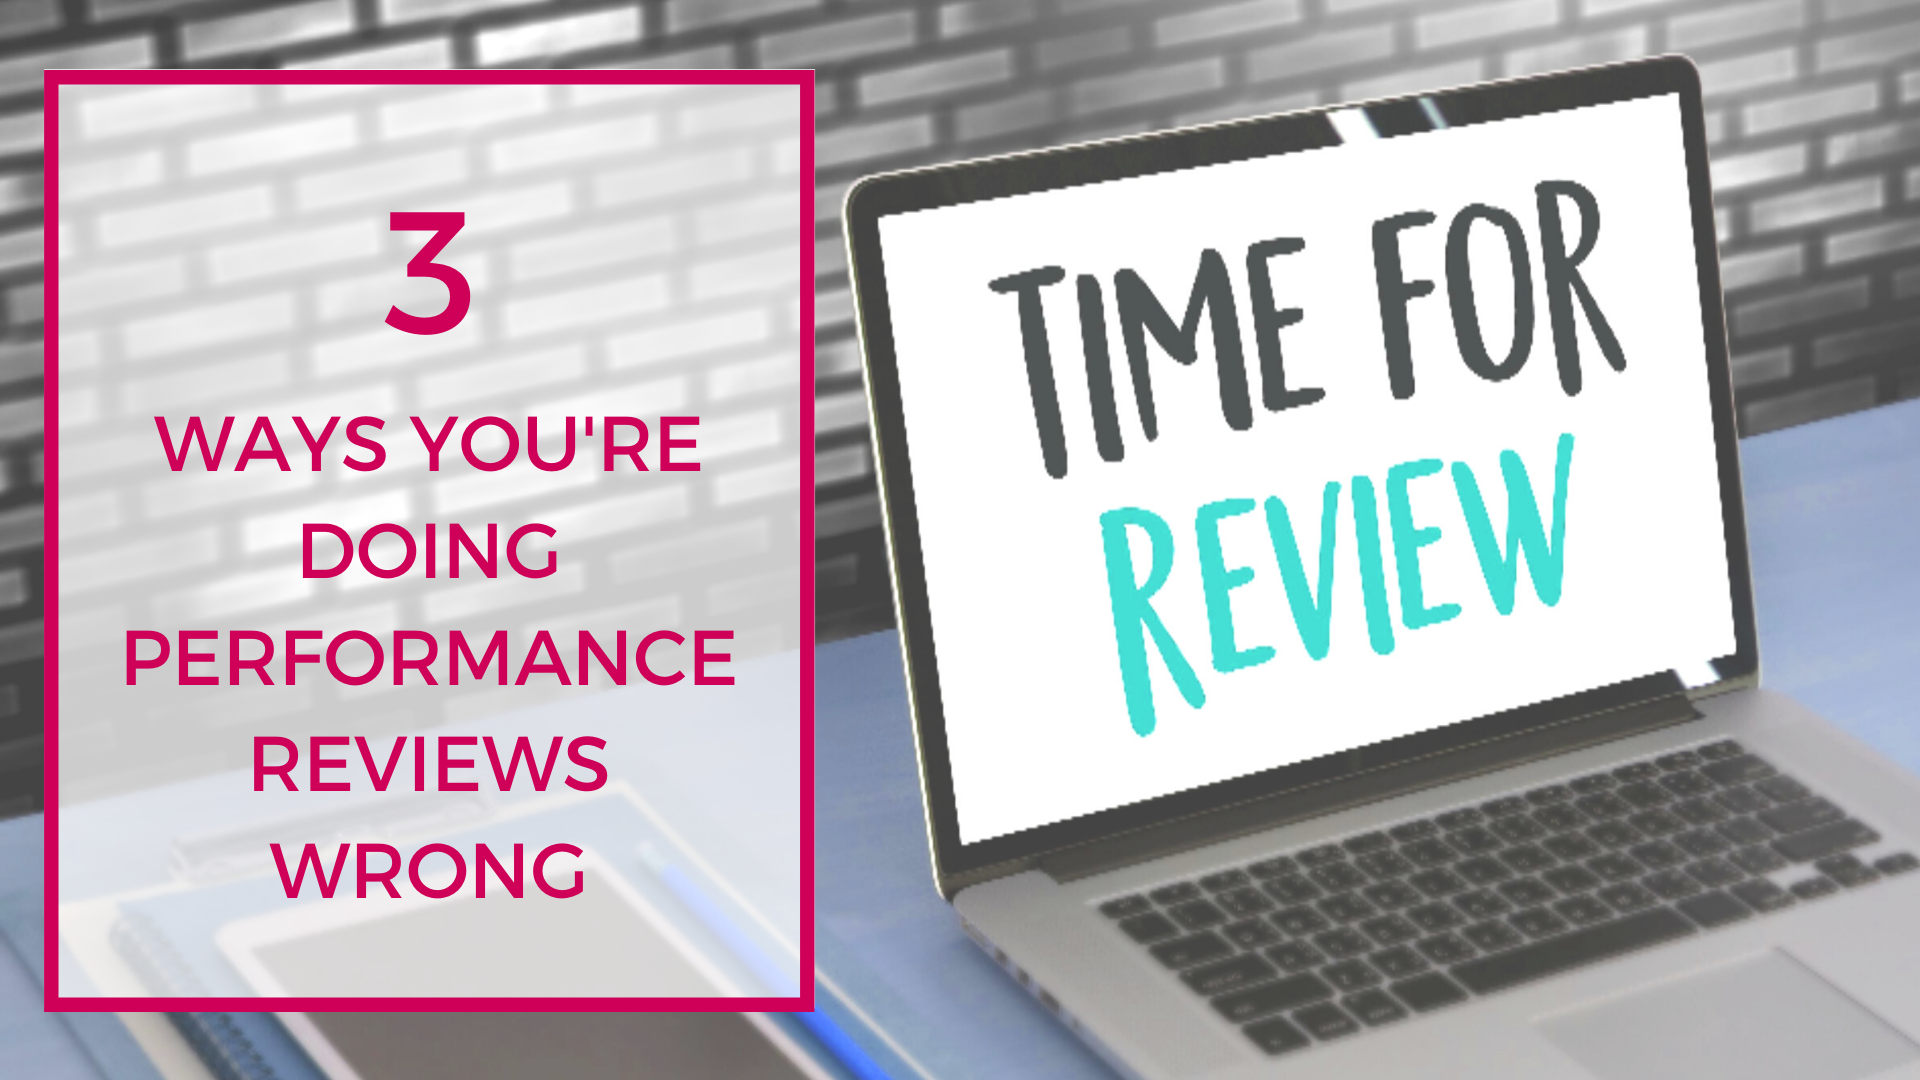 Copy of performance reviews-1